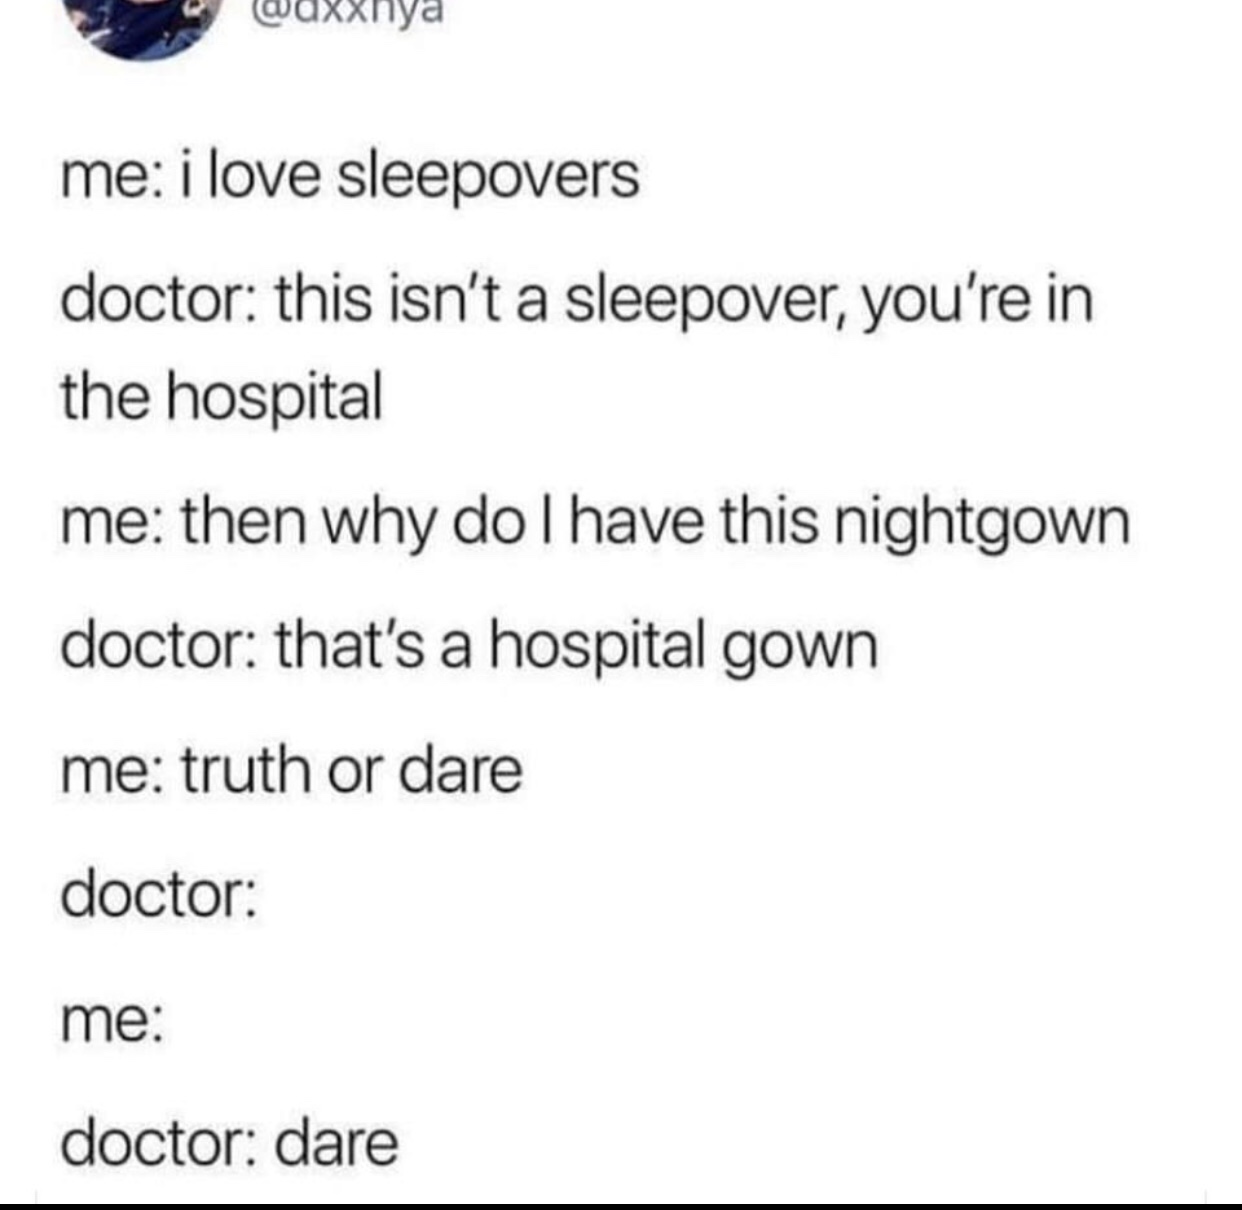 document - Waxxnya me i love sleepovers doctor this isn't a sleepover, you're in the hospital me then why do I have this nightgown doctor that's a hospital gown me truth or dare doctor me doctor dare